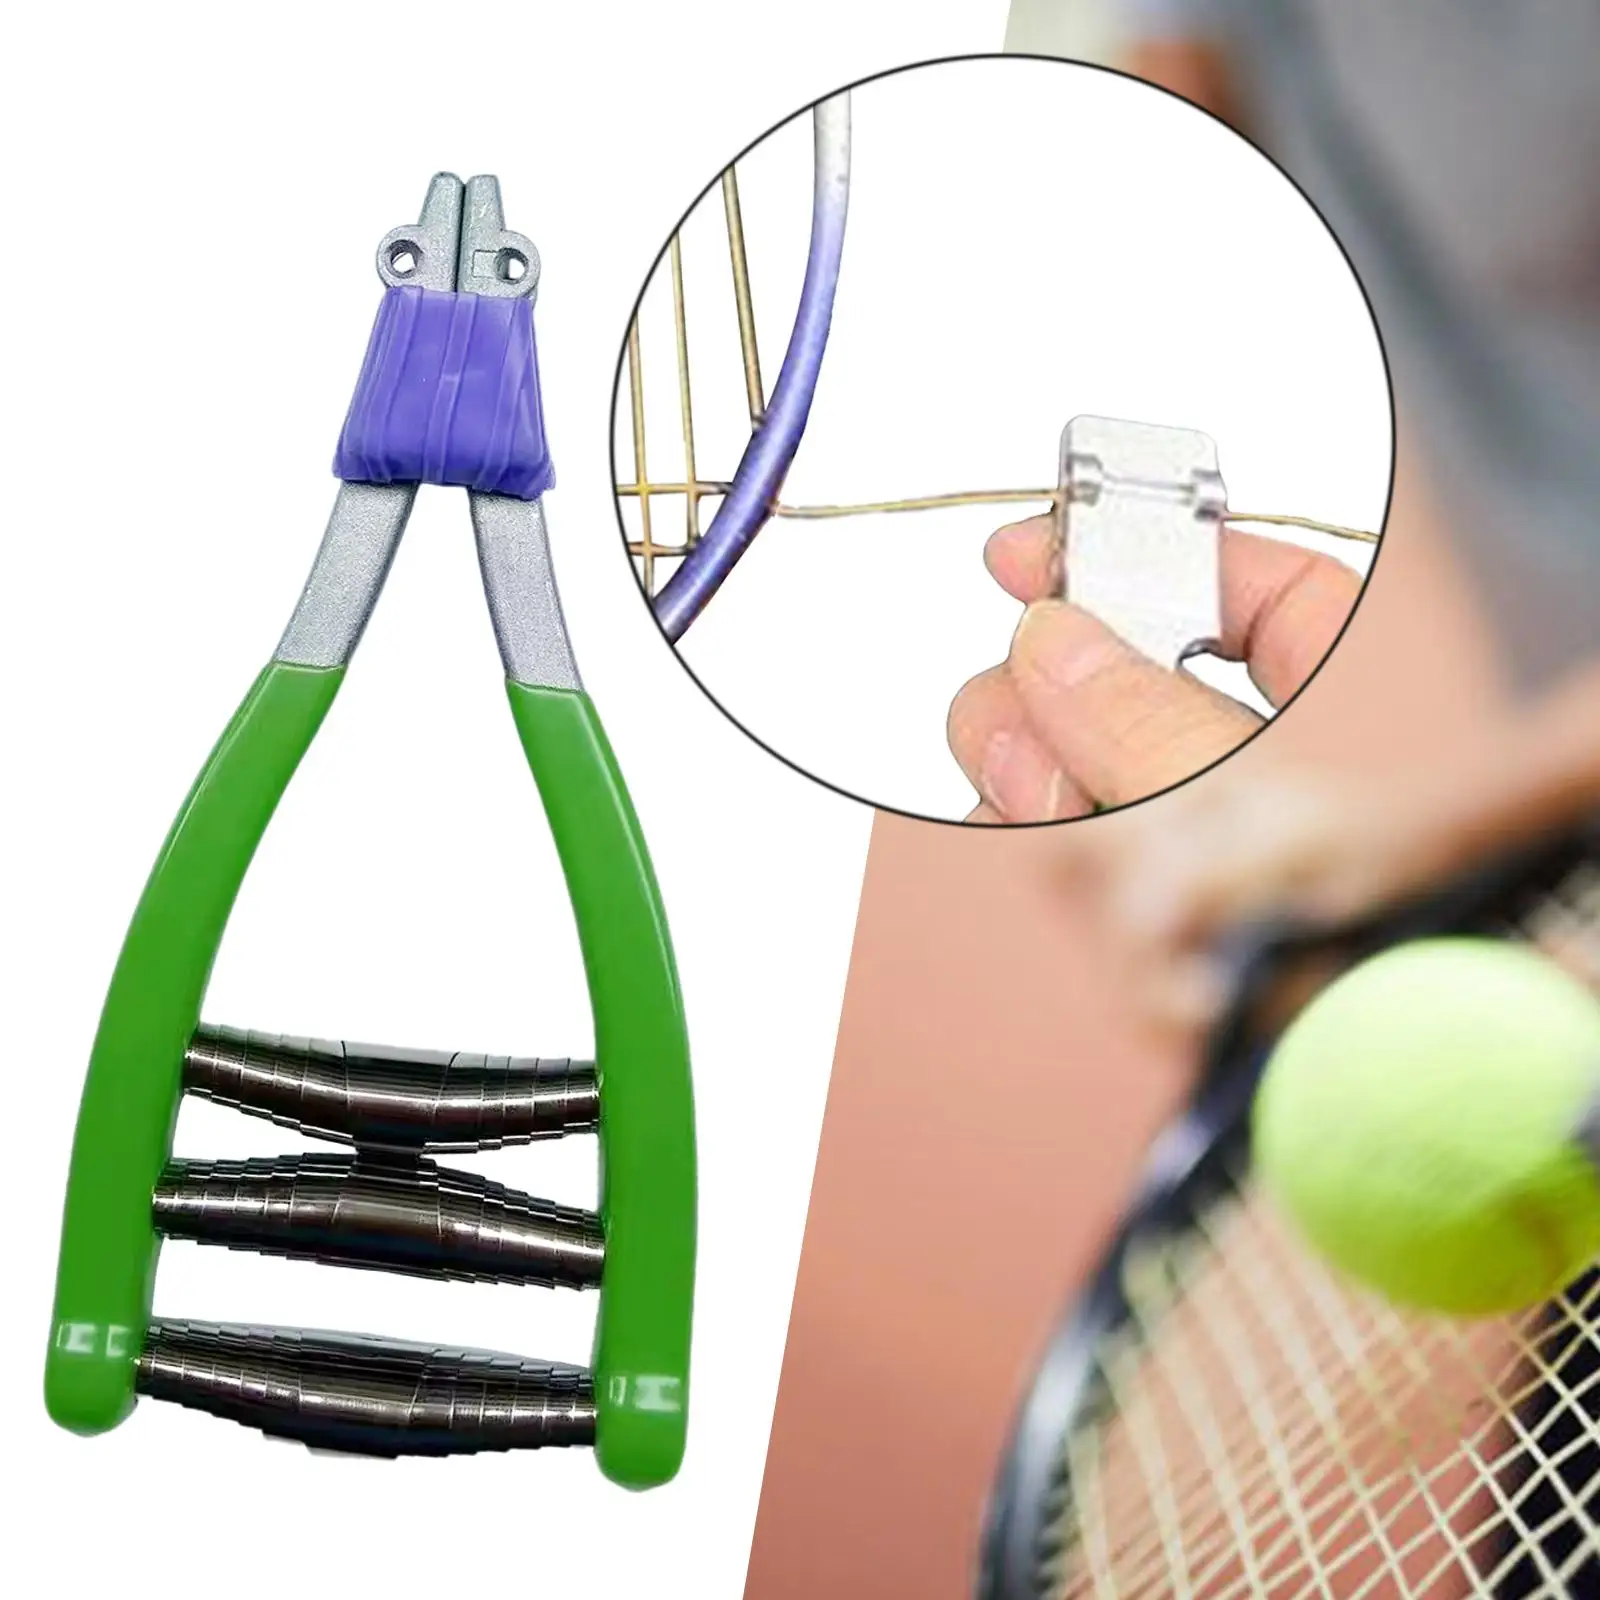 Spring Loaded Sports Starting Clamp Alloy Tennis Badminton Stringing Clamp